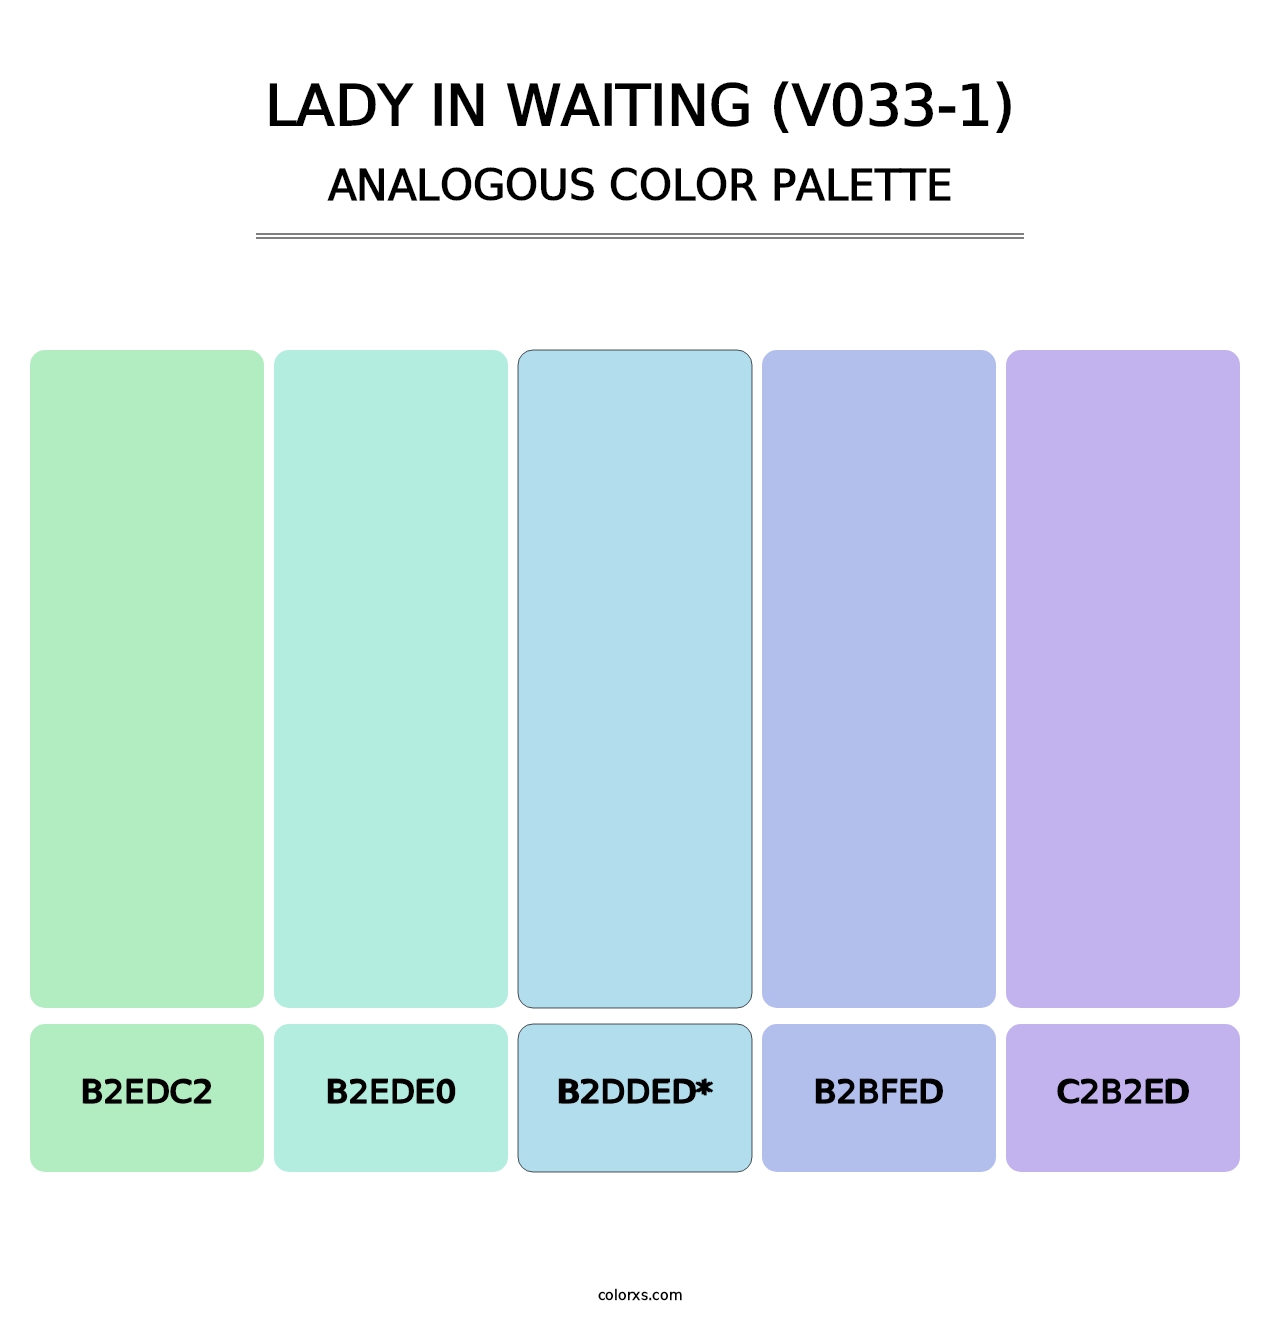 Lady in Waiting (V033-1) - Analogous Color Palette